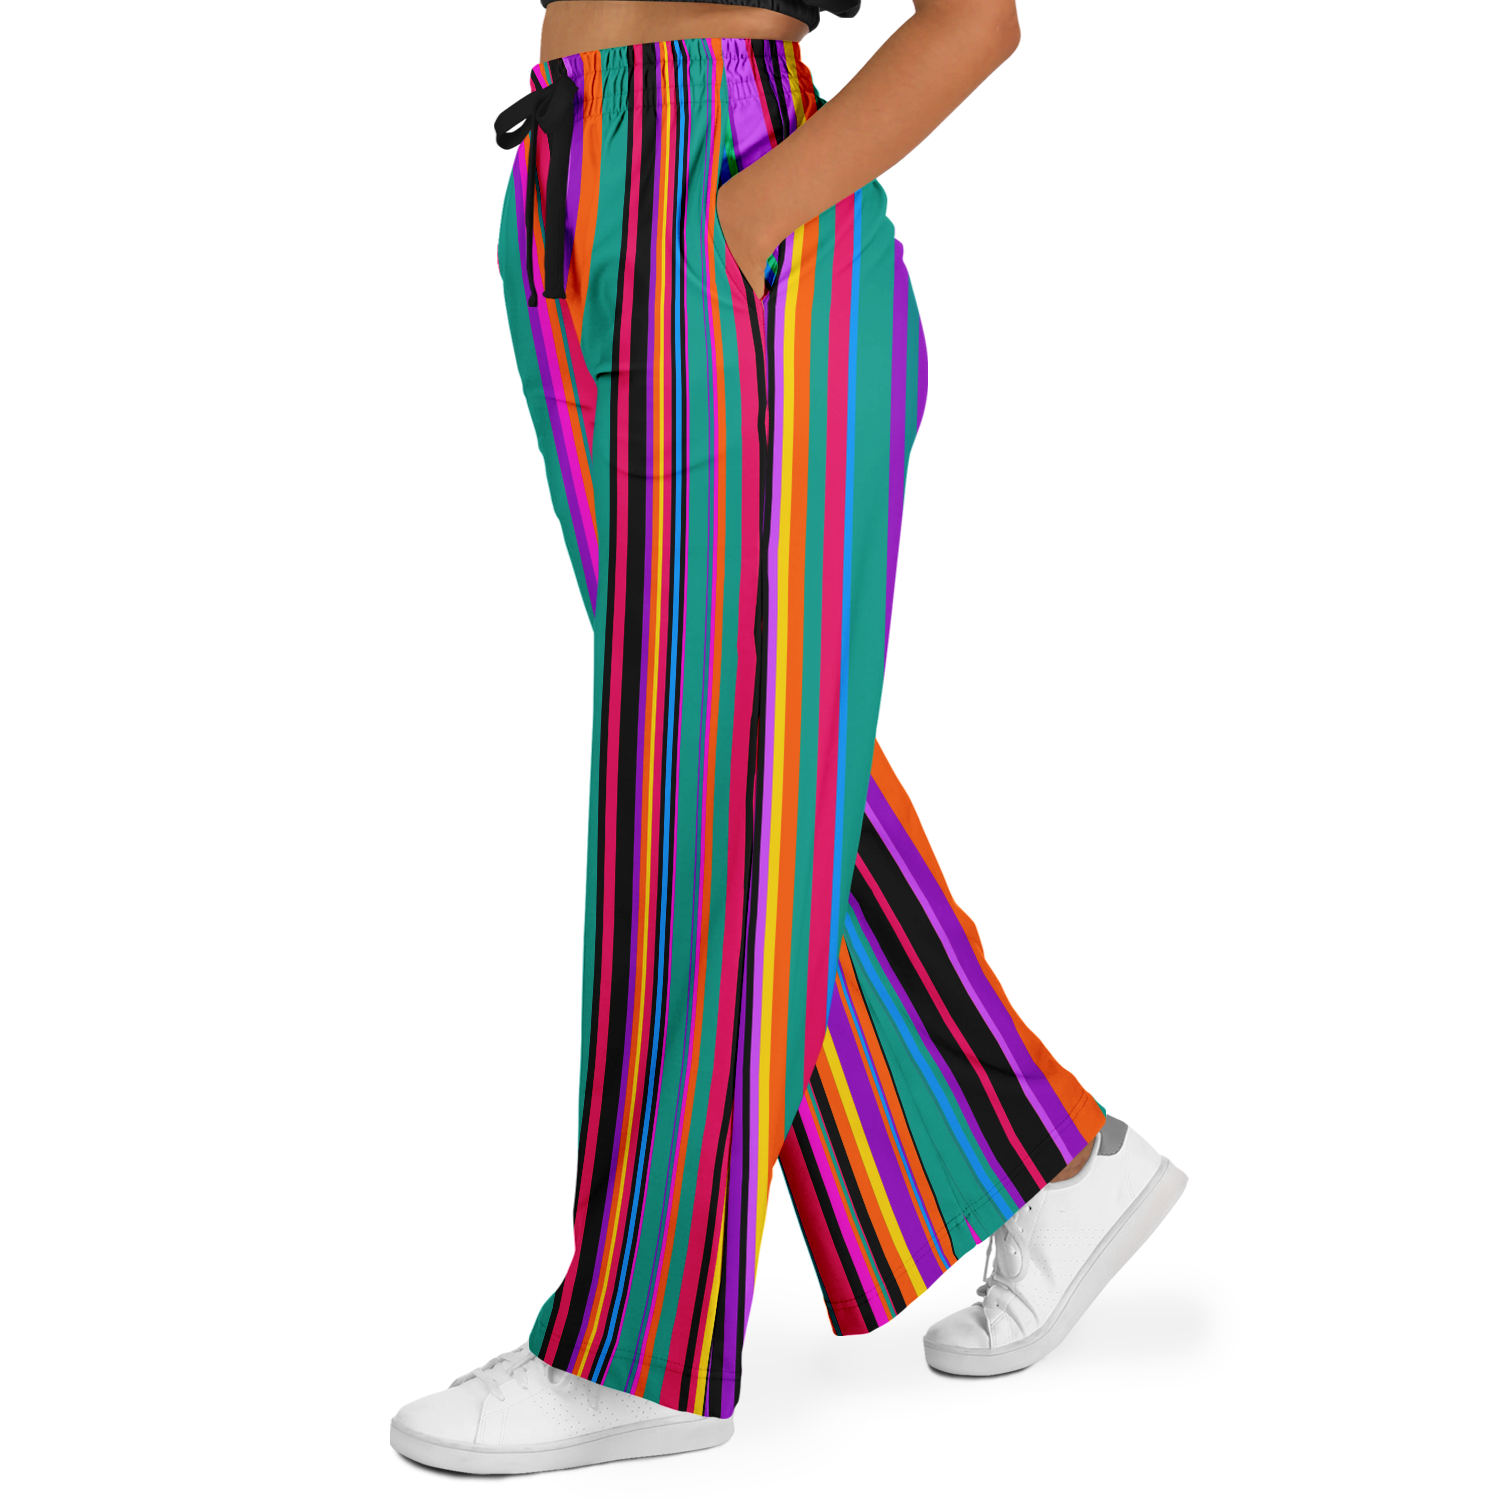  face painter pants - colouful flares - balloon dog apparel